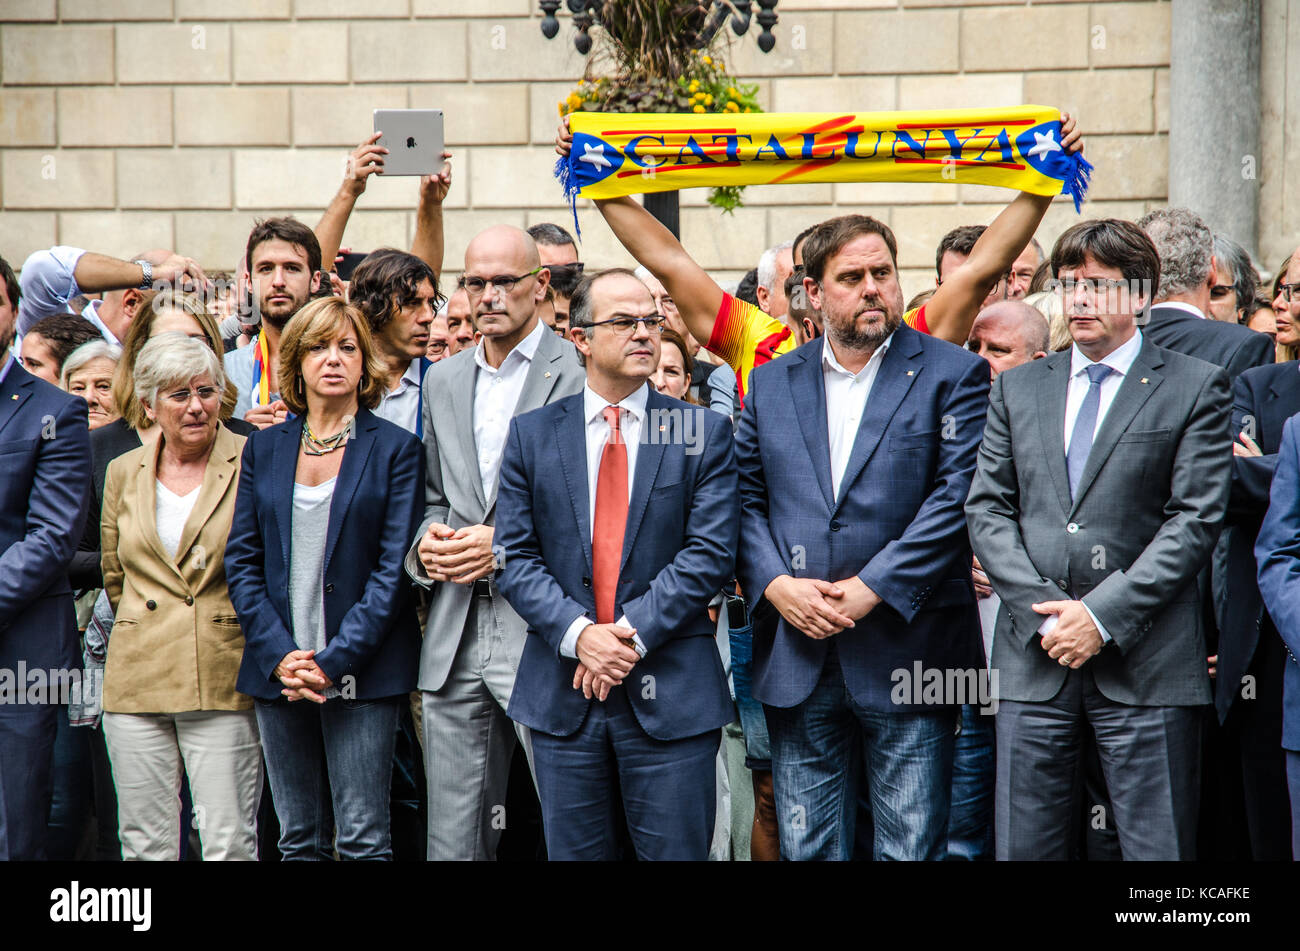 Barcelona, Spain. 3rd Oct, 2017. The Government of the Generalitat are seen during the minute of silence, while a man raising in the air a Catalonia scarf. The Catalan Government and the city of Barcelona gathered for a minute of silence as a sign of rejection against Police brutality, in the San Jauma Plaza, headquarters of both administrations. Stock Photo